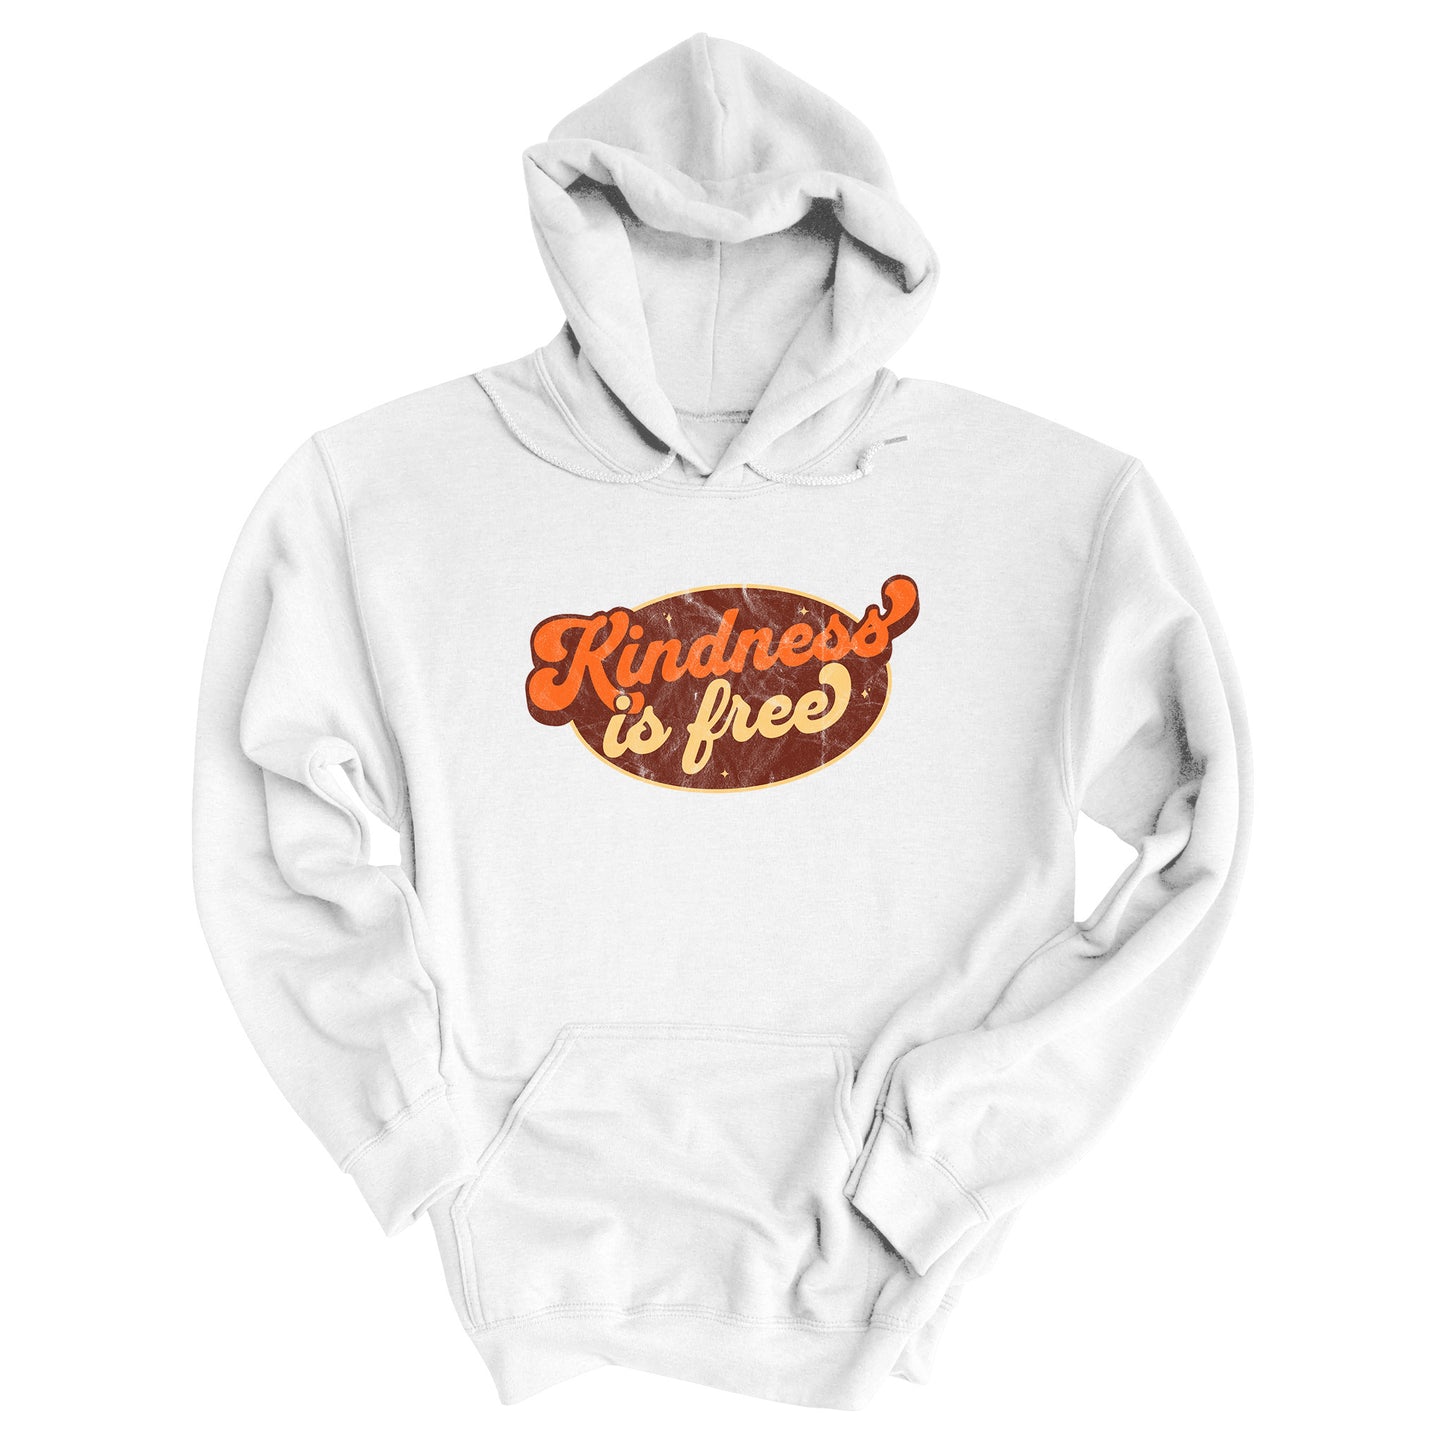 White unisex hoodie with a retro graphic that says “Kindness is free.” The text is in a script font with a brown oval behind it. The “k” and the “s” in the word “Kindness” are not contained inside the oval. The graphic is also distressed to add to the retro feel.